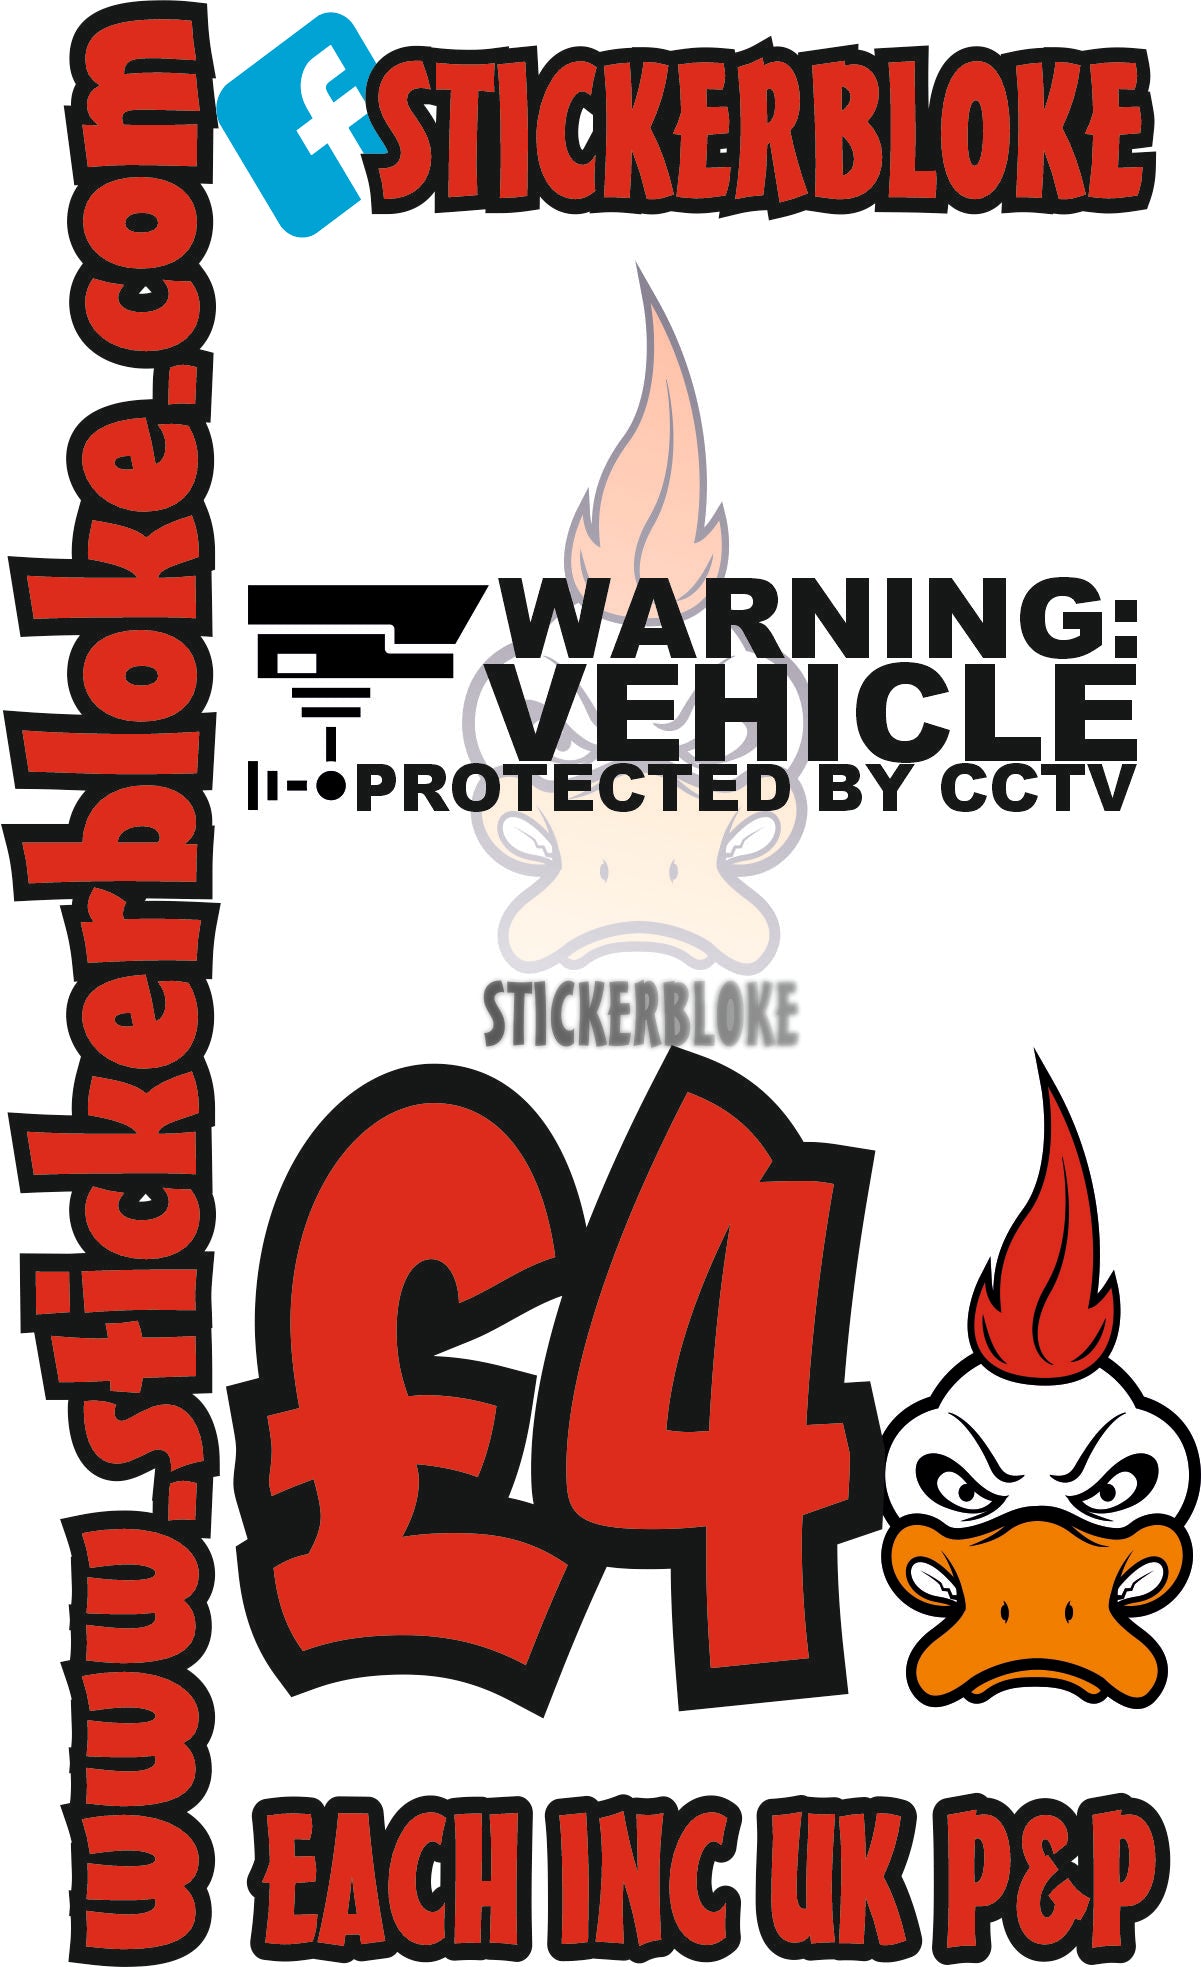 WARNING VEHICLE PROTECTED BY CCTV - STICKERBLOKE